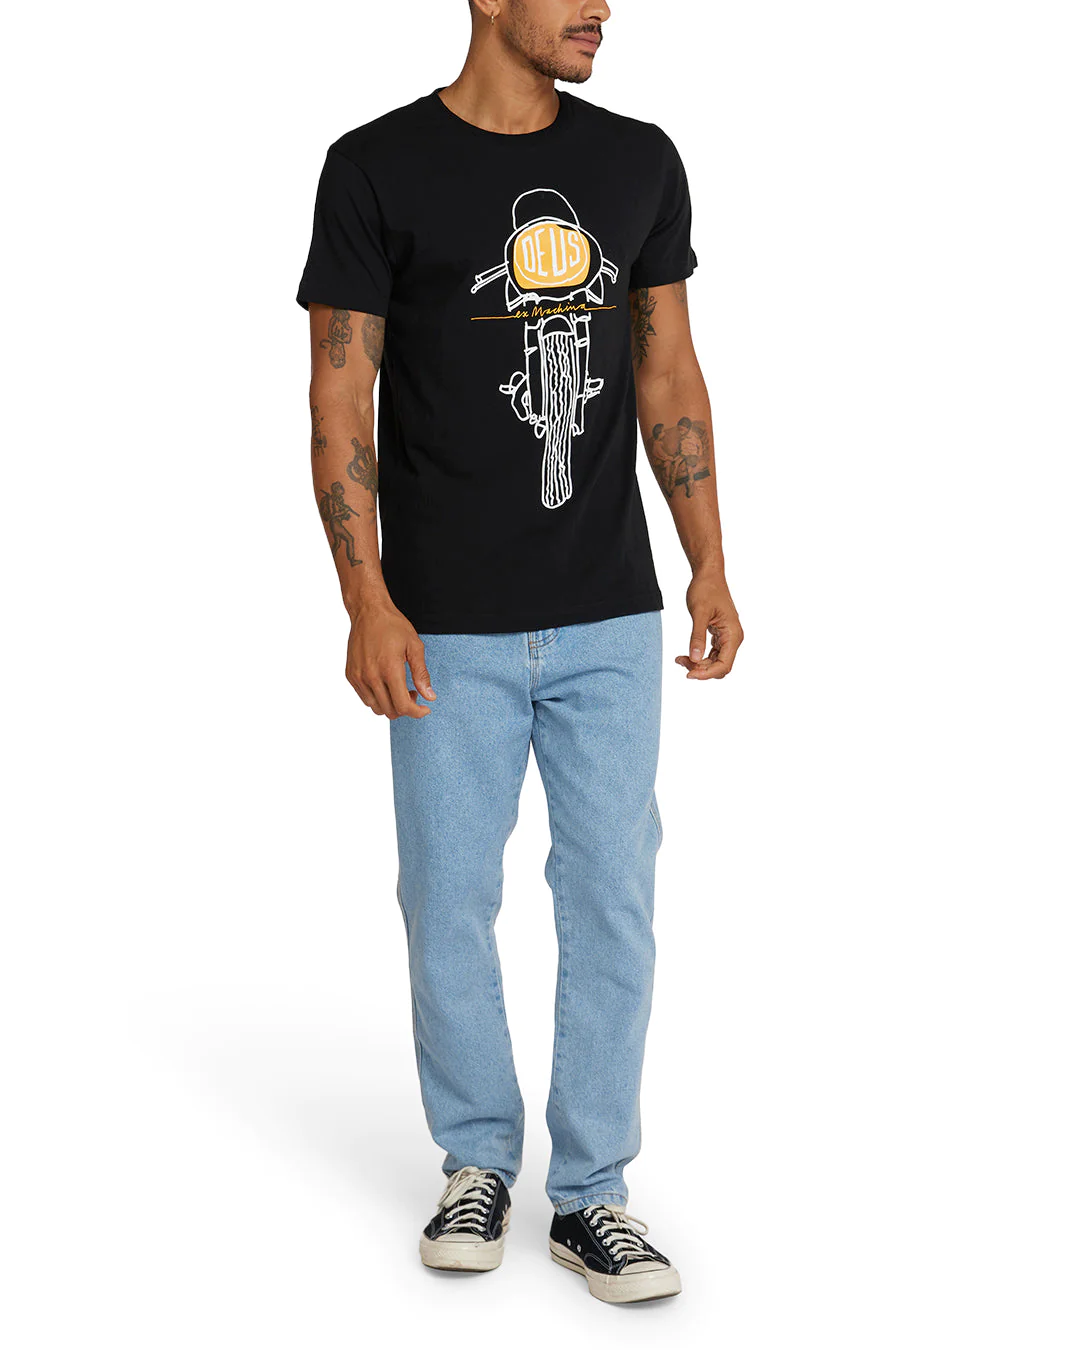 Frontal Matchless Tee